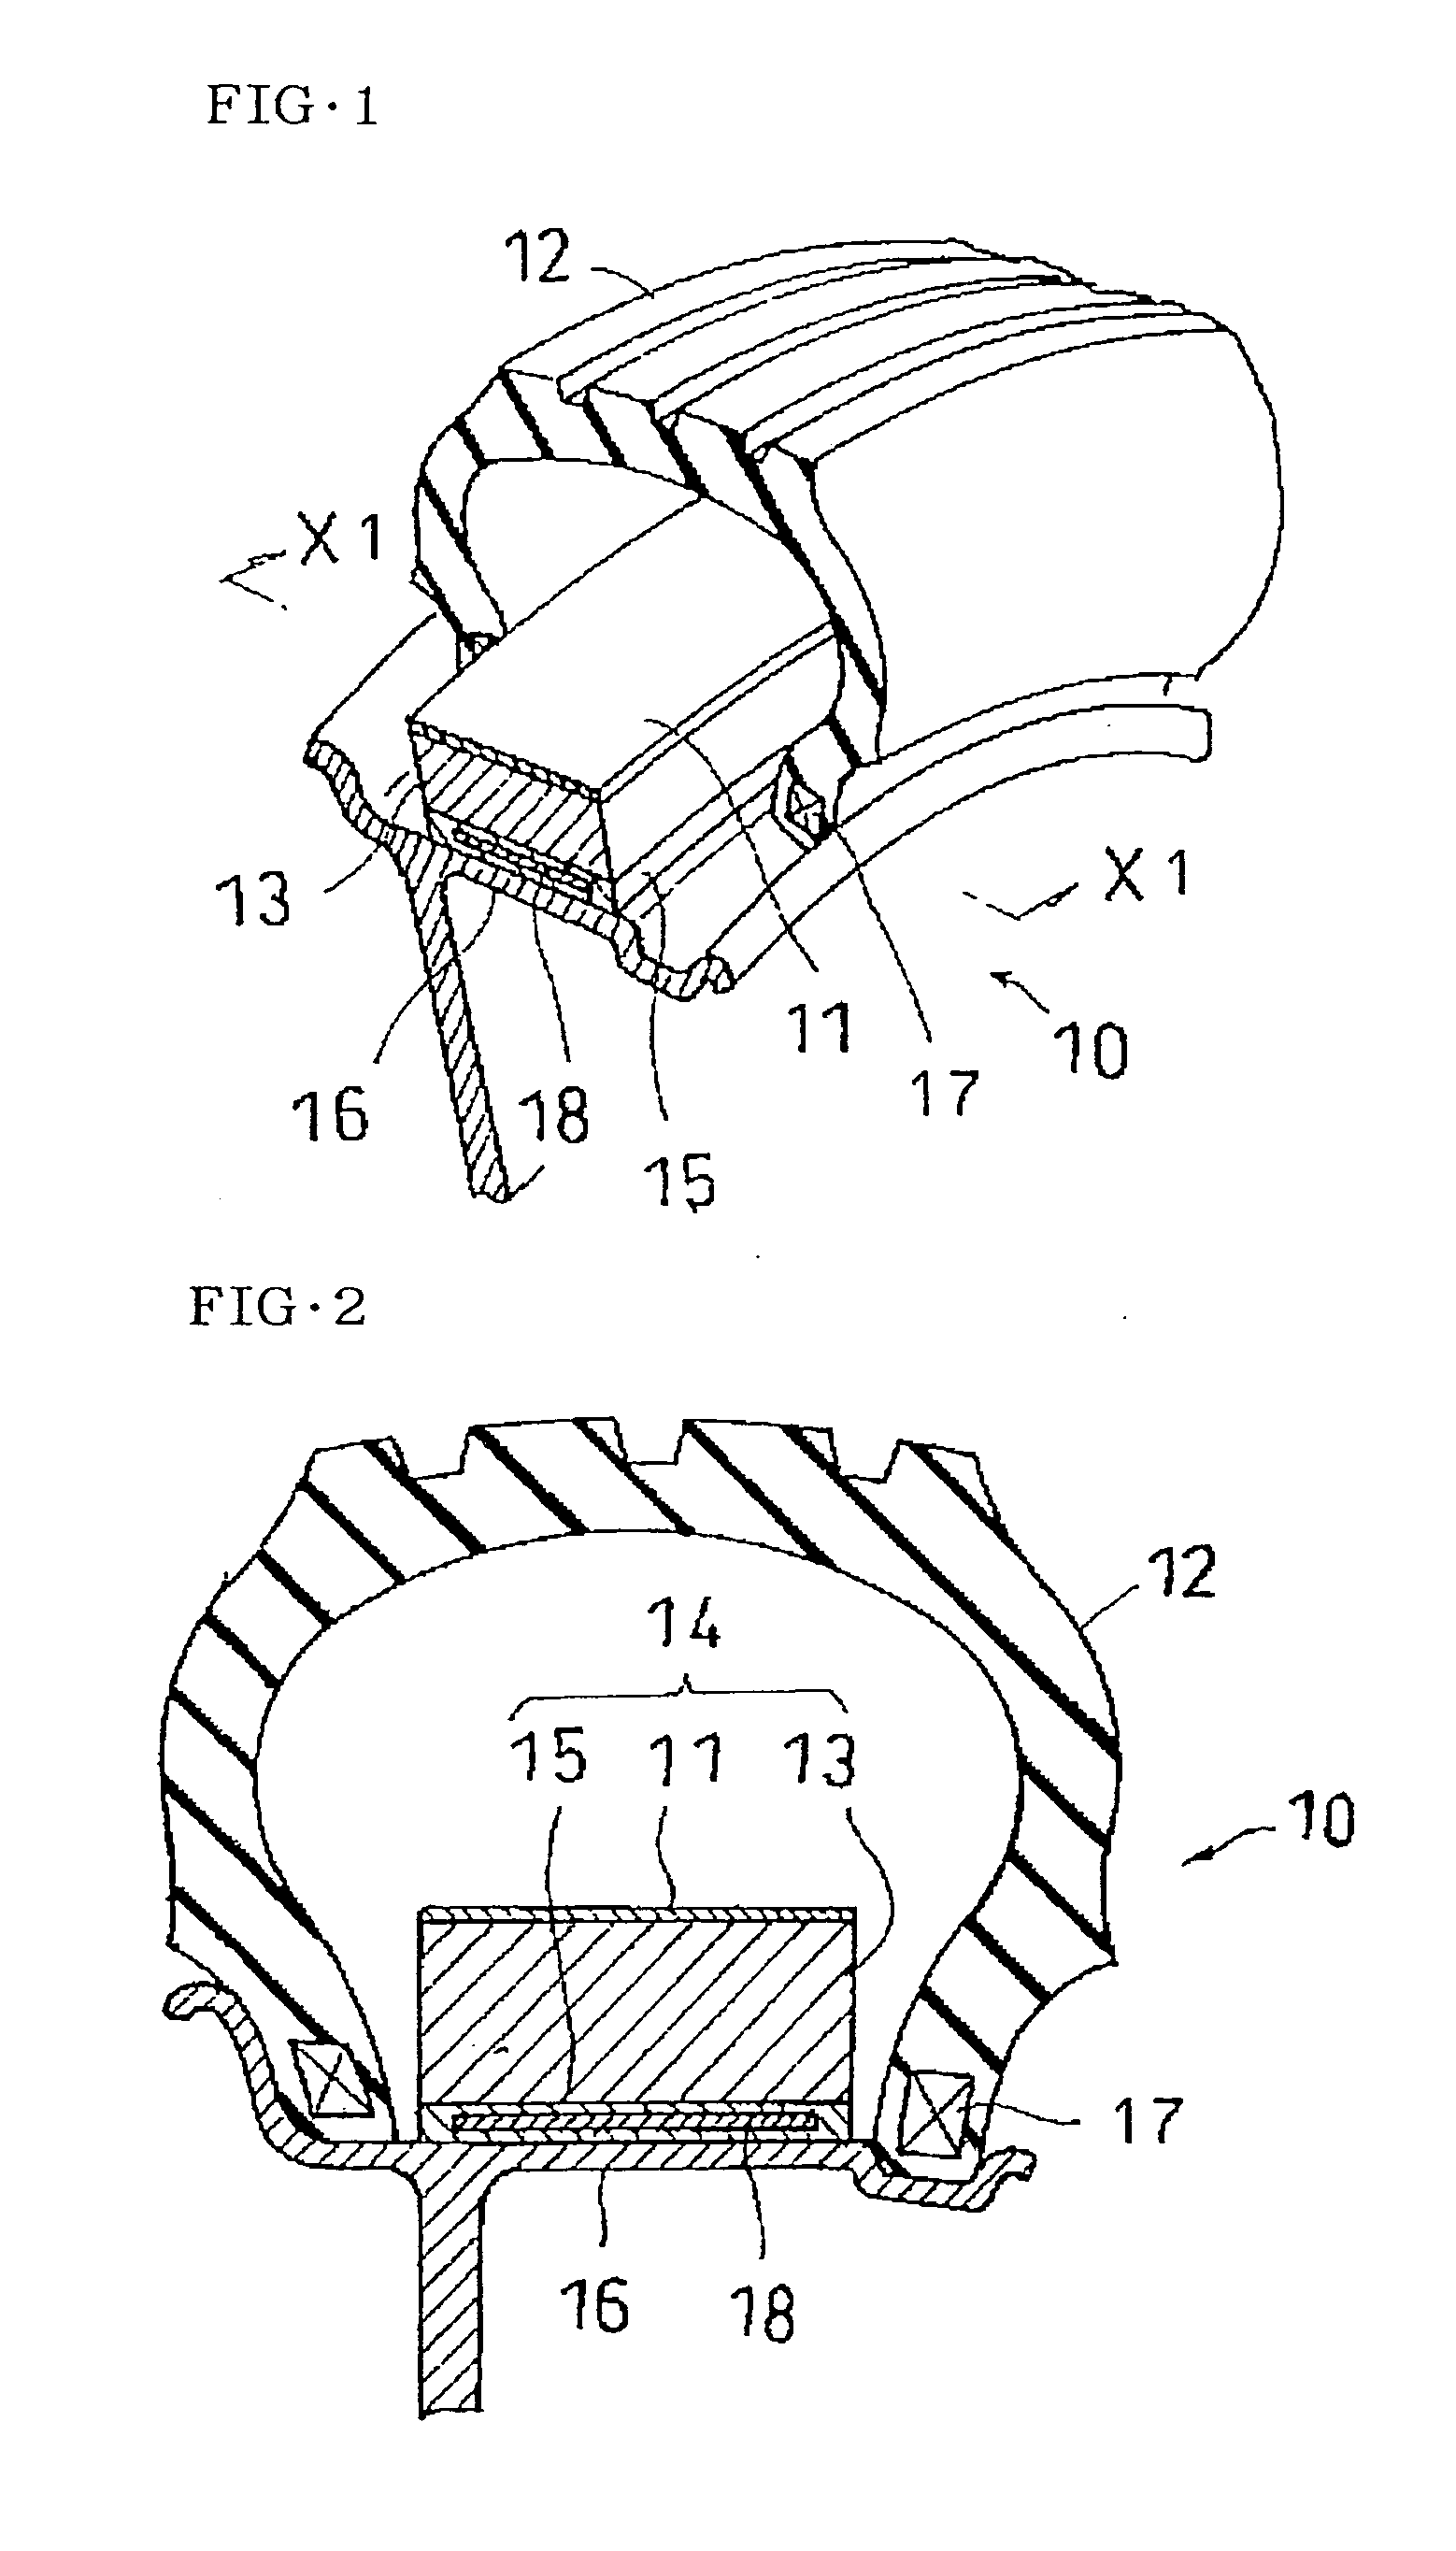 Run-Flat Tire Support, Manufacturing Method Therefor, and a Run-Flat Tire with the Run-Flat Tire Support Fixedly Mounted Thereto